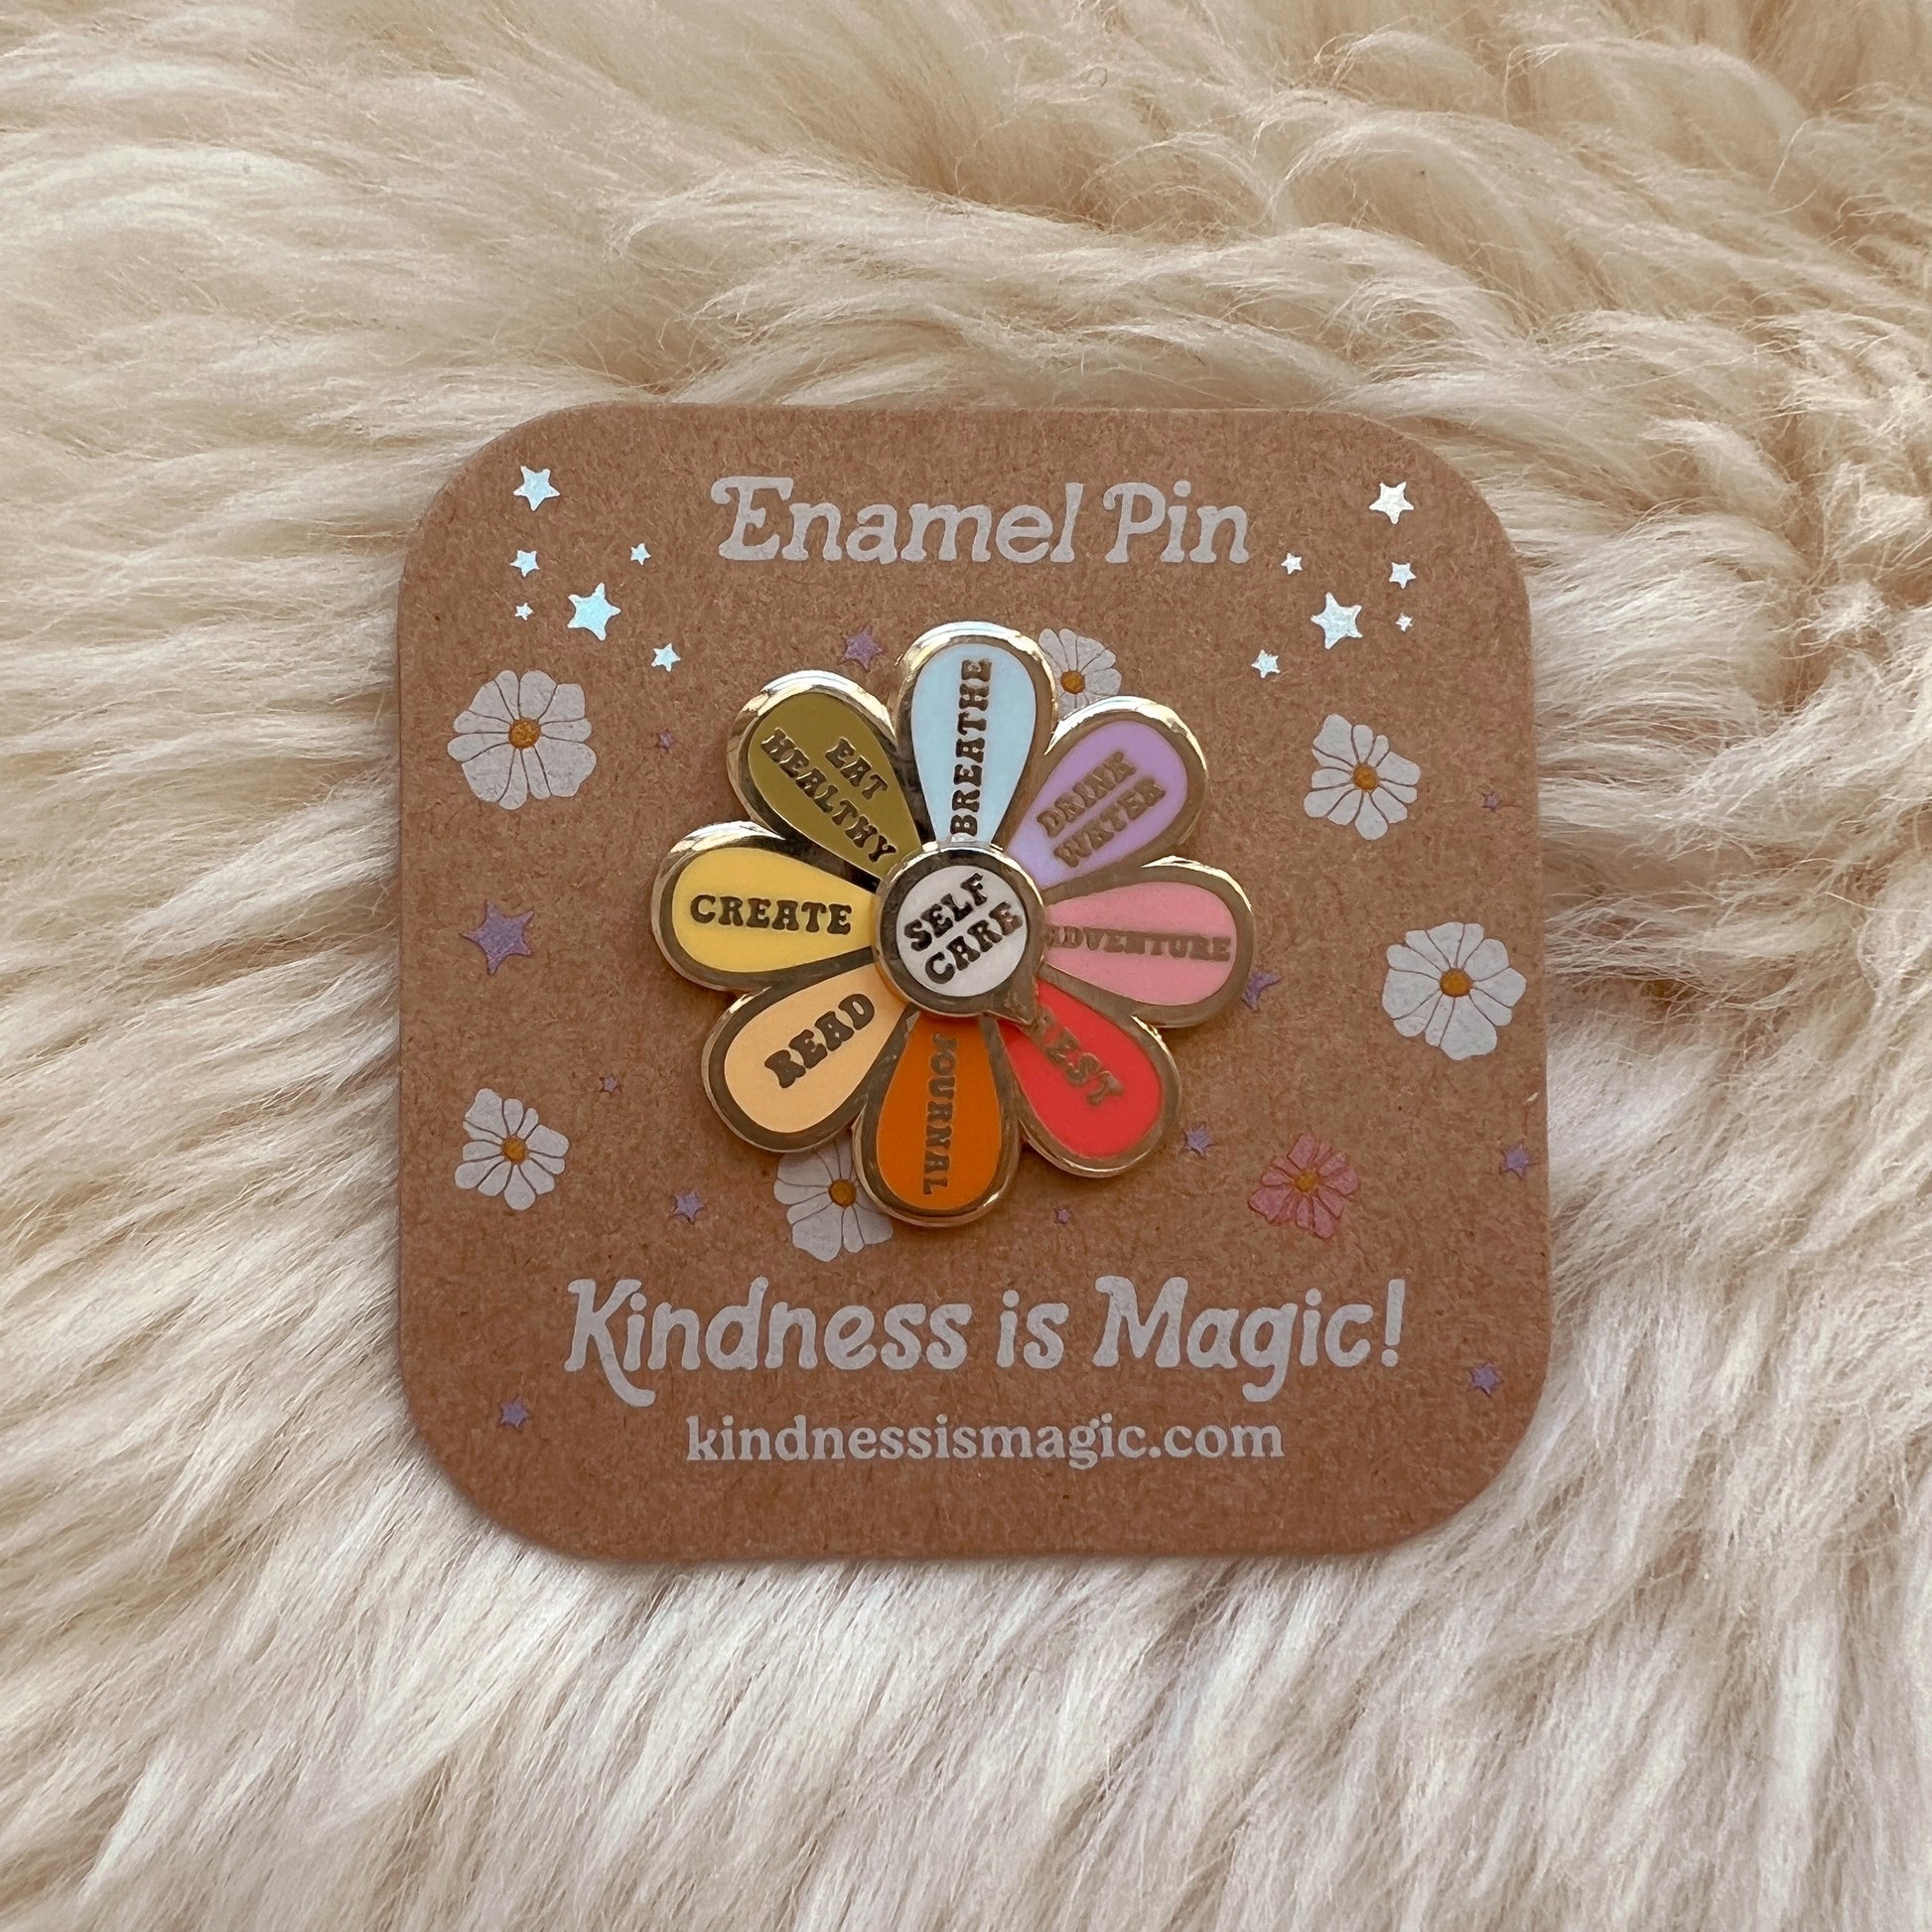 What To Drink (Spinner) Pin